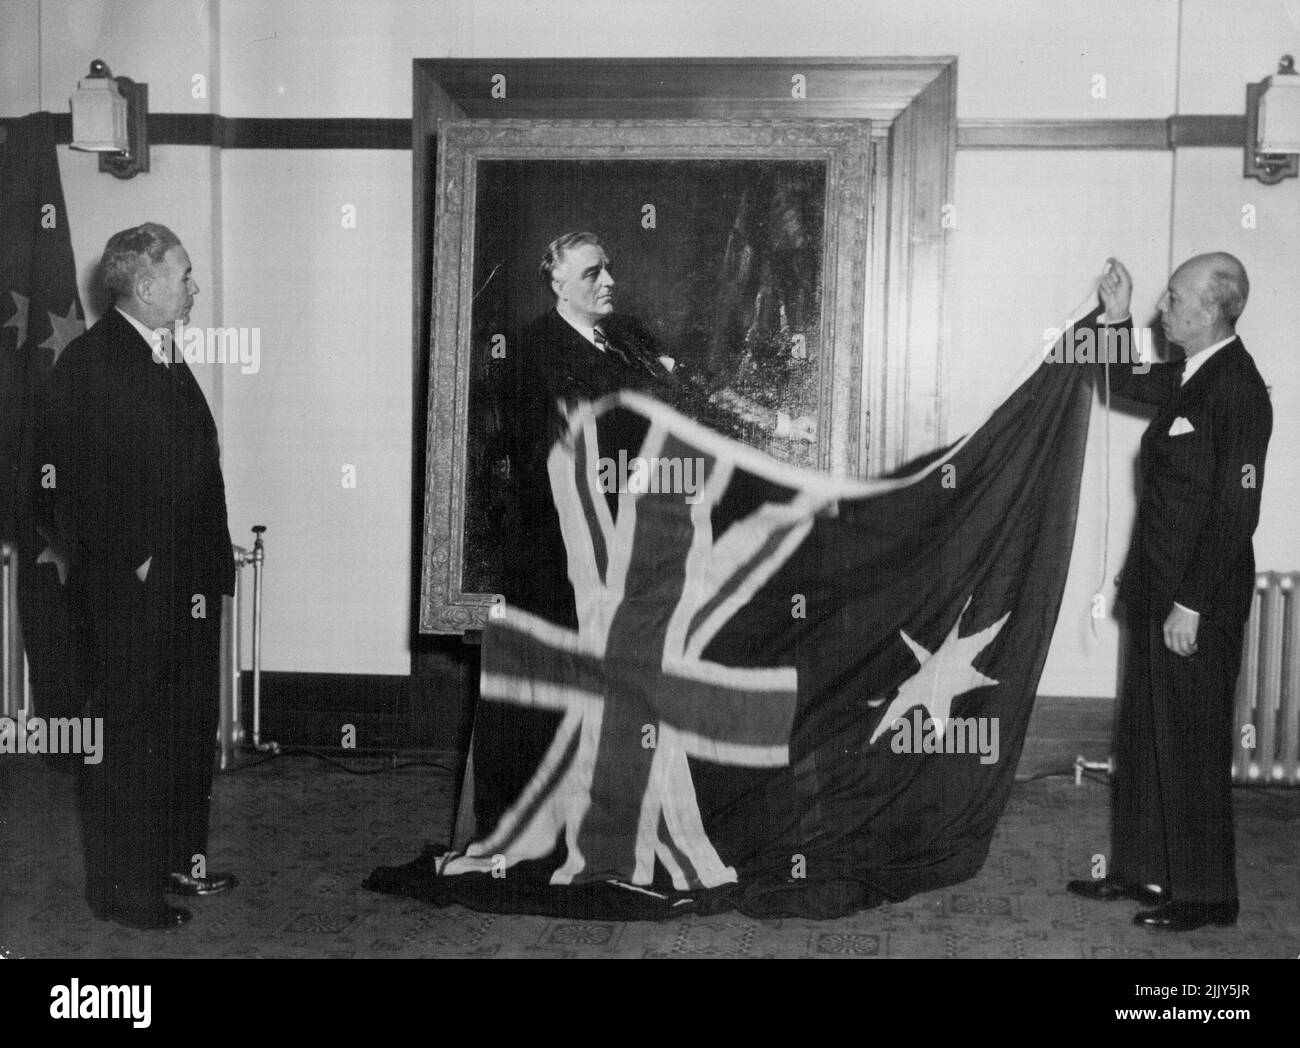 The U.S. Charge d'Affairs, Mr. Orsen Nielsen, unveils a portrait of the late Franklin Roosevelt at Parliament House, Canberra, in the presence of the Prime Minister, the Rt. Hon. J.B. Chifley. The portrait was painted by Franck Salisbury, R.I., and is a replica of one hanging at Hyde Park, New York State. It will from part of the Roosevelt Memorial library at Canberra. November 11, 1948. Stock Photo